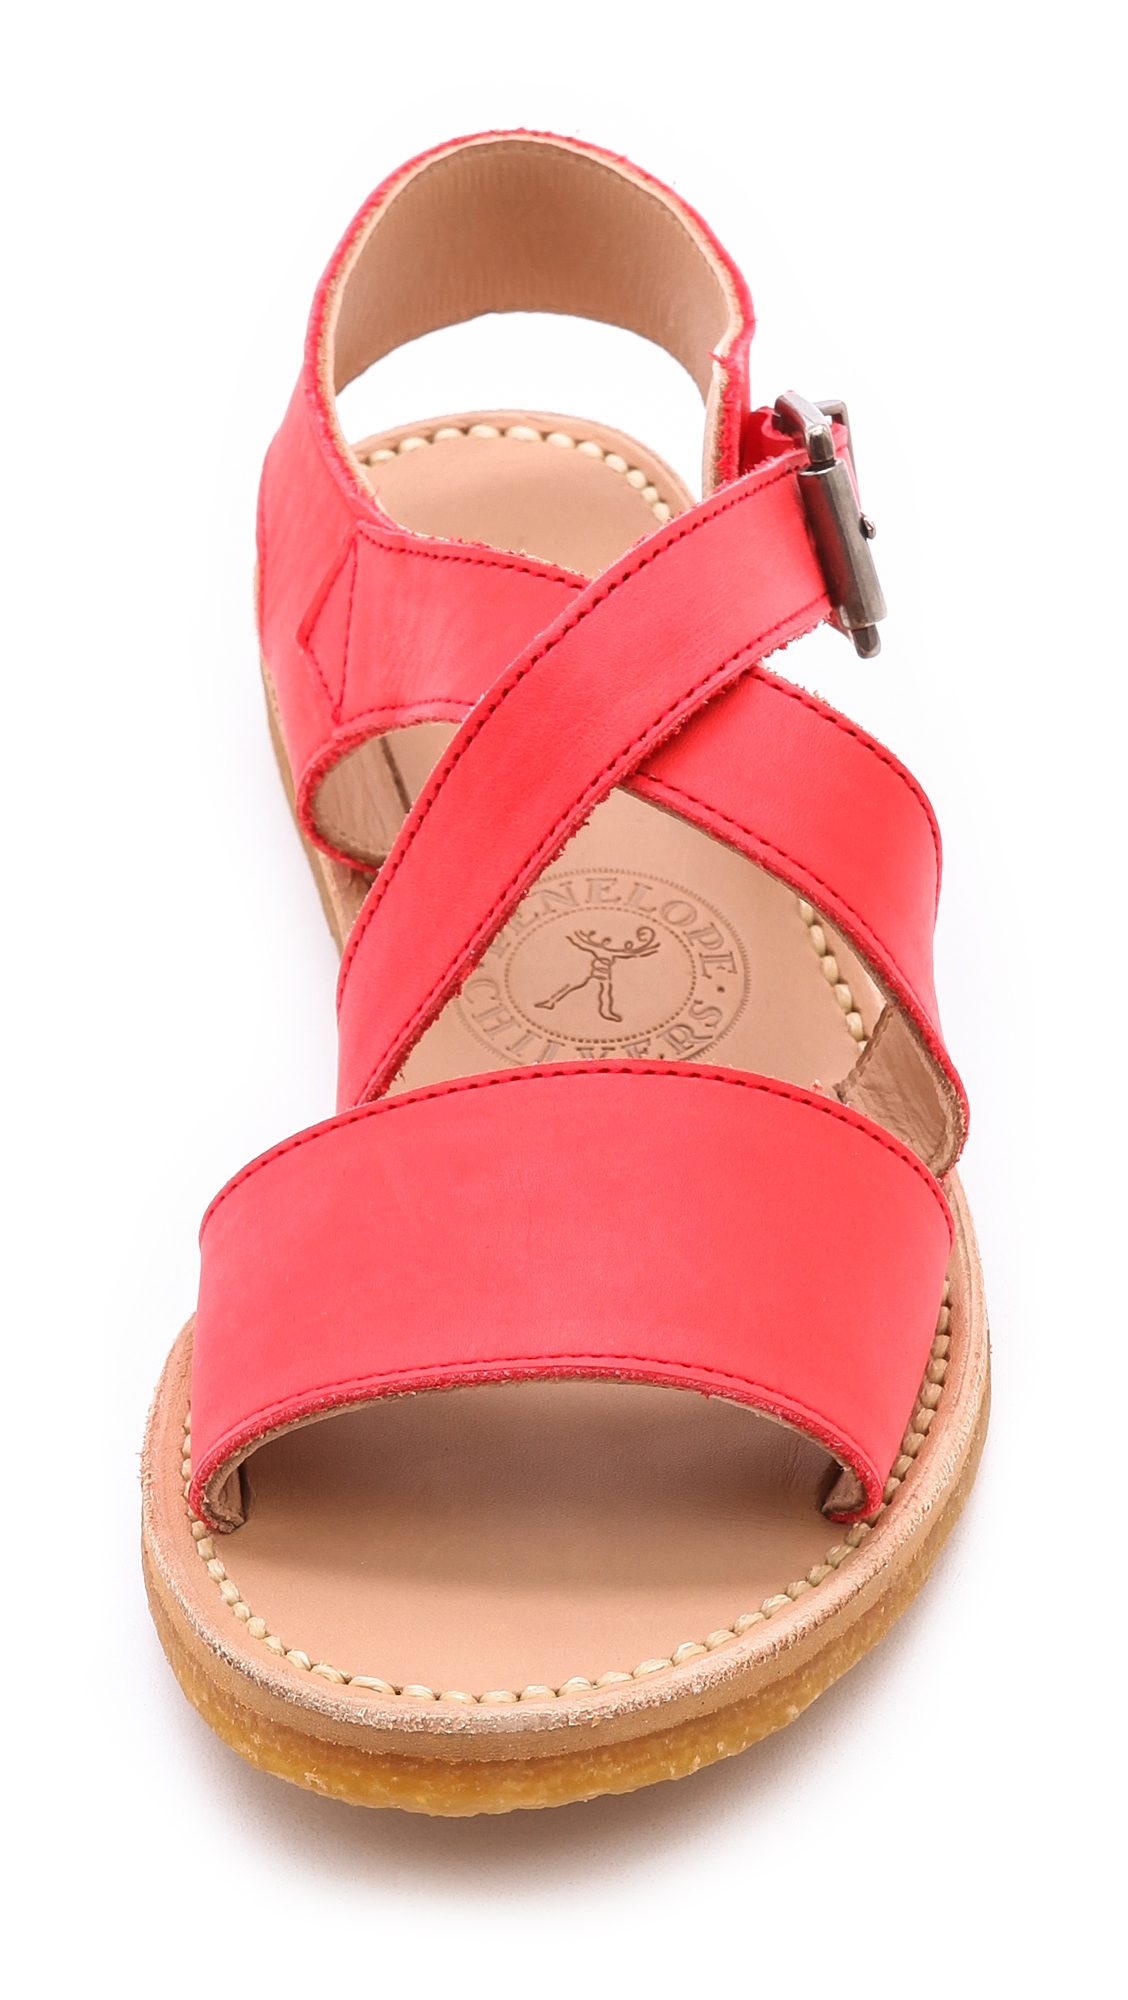 Lyst - Penelope Chilvers Cresta Sandals Poppy in Red